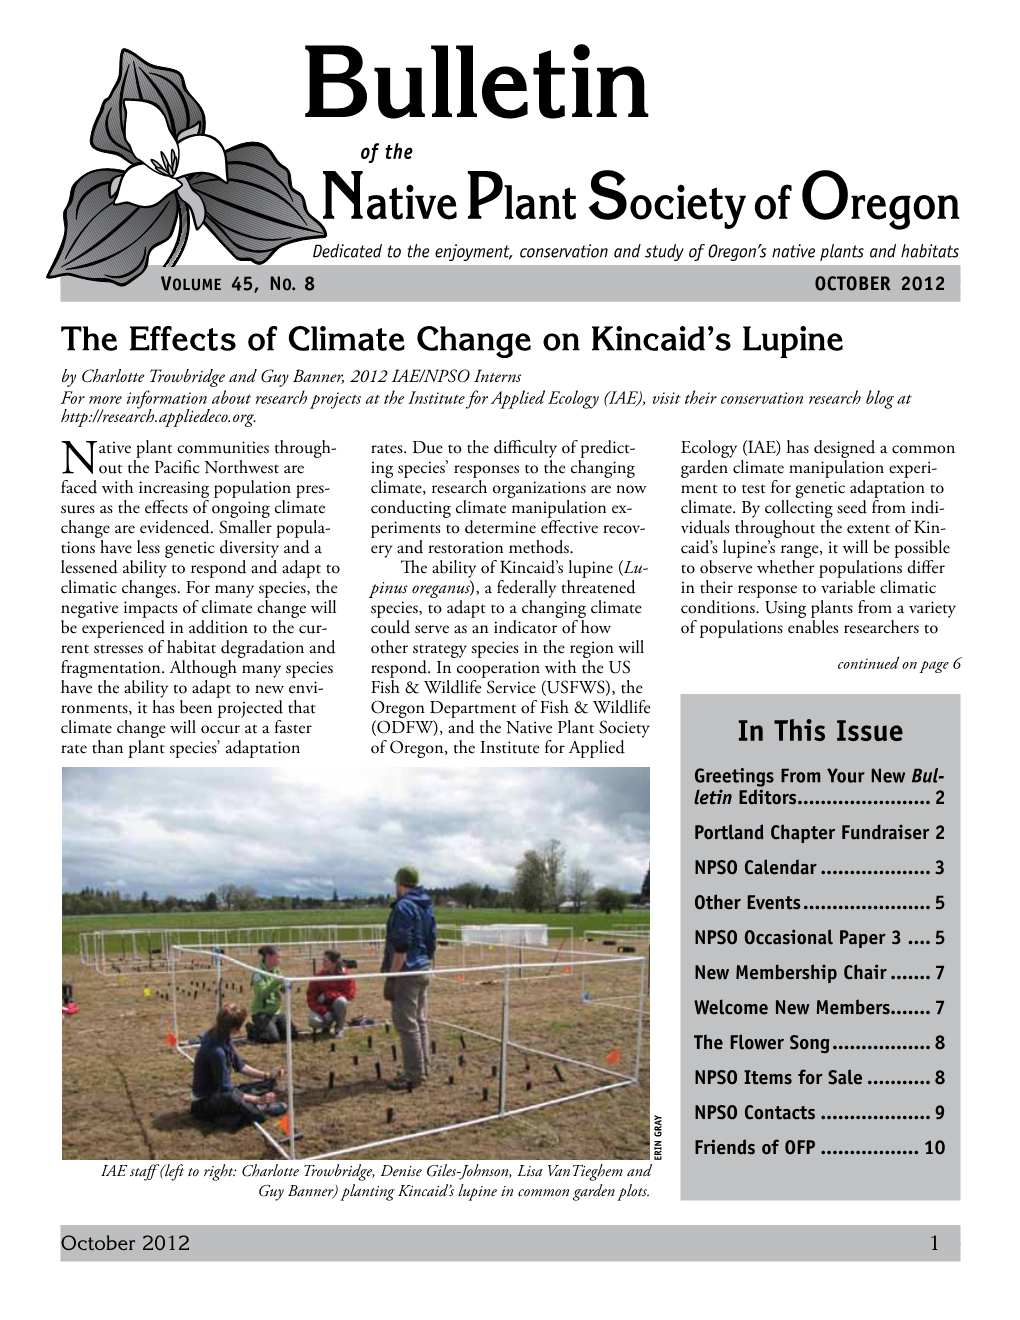 Bulletin of the Native Plant Society of Oregon Dedicated to the Enjoyment, Conservation and Study of Oregon’S Native Plants and Habitats Volume 45, No